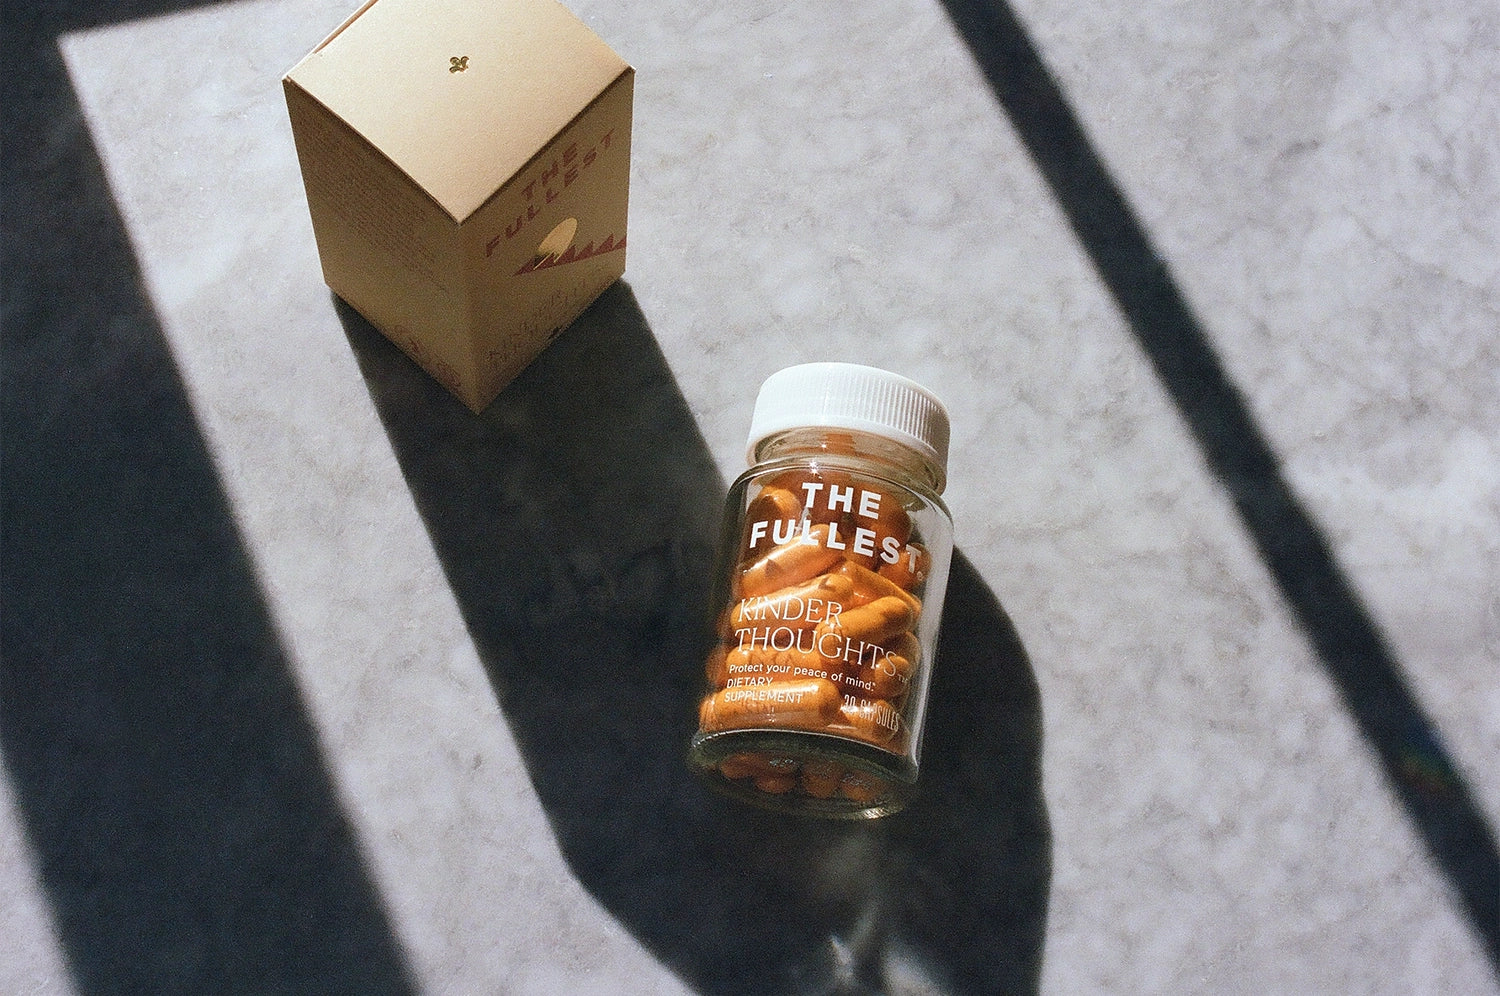 An overhead view of a clear pill bottle labeled "the fullest kinder thoughts," filled with orange saffron and turmeric capsules, placed flat on a grey concrete surface next to its box.